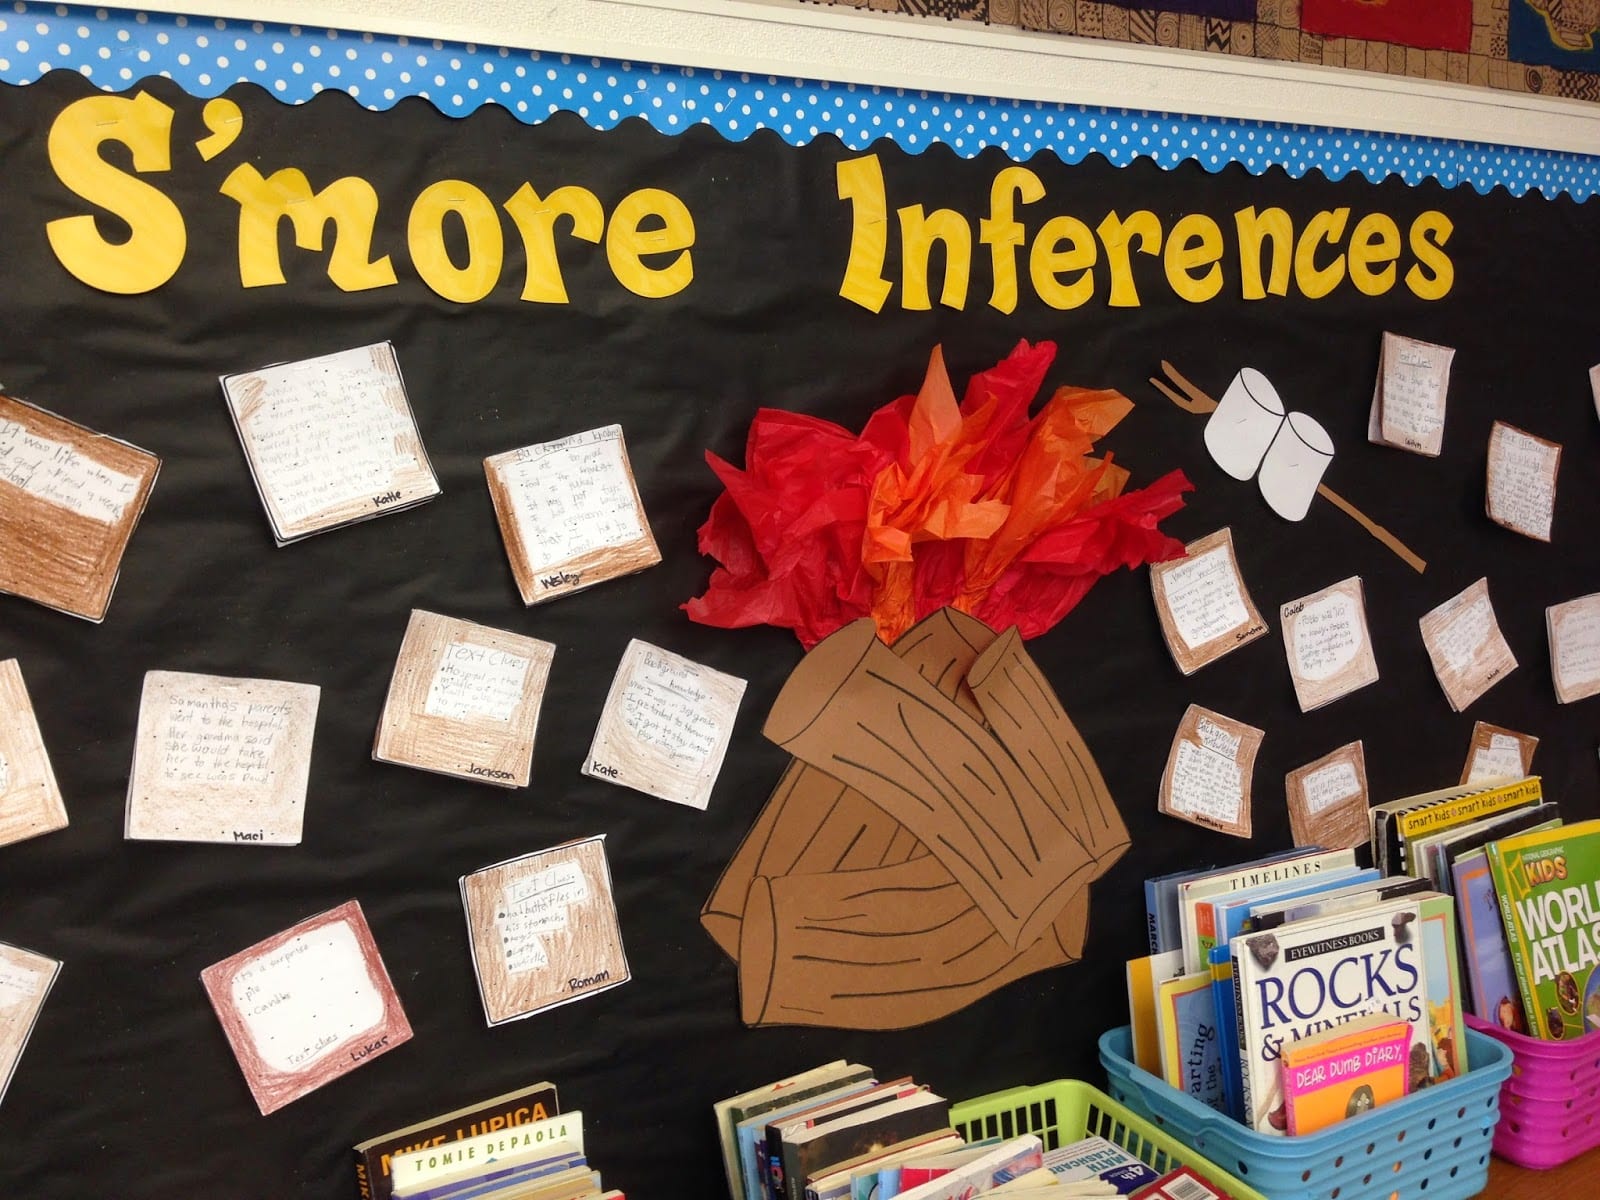 S’more Inferences